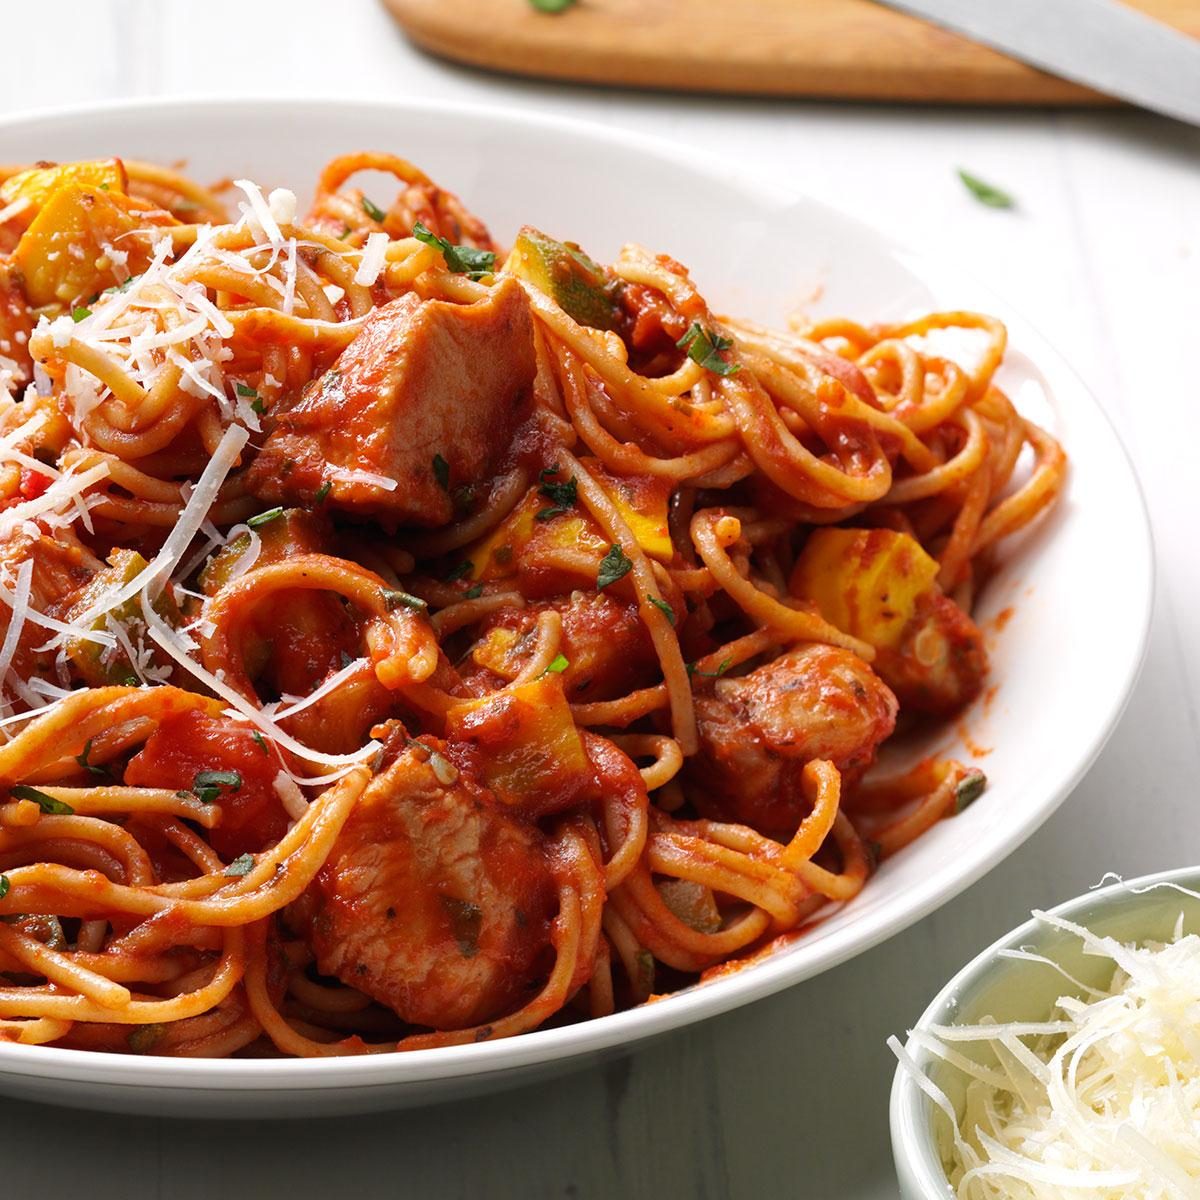 Here's The Real Reason There's A Hole In Your Spaghetti Spoon